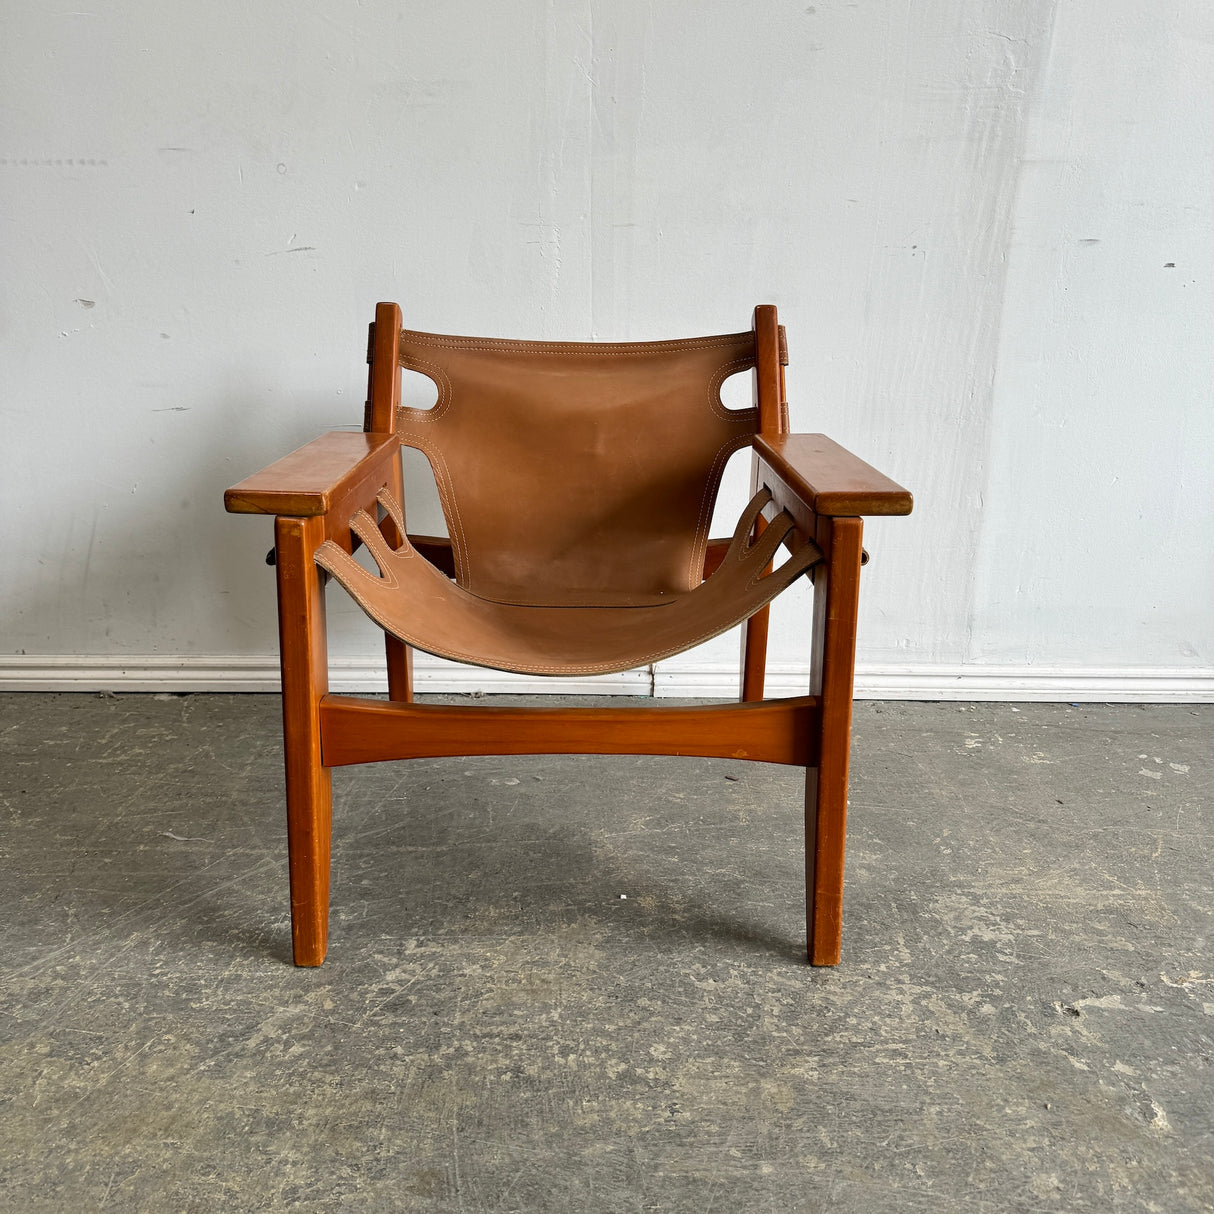 Vintage Sergio Rodrigues ‘Kilin’ Lounge Chair for Oca Industries, Brazil